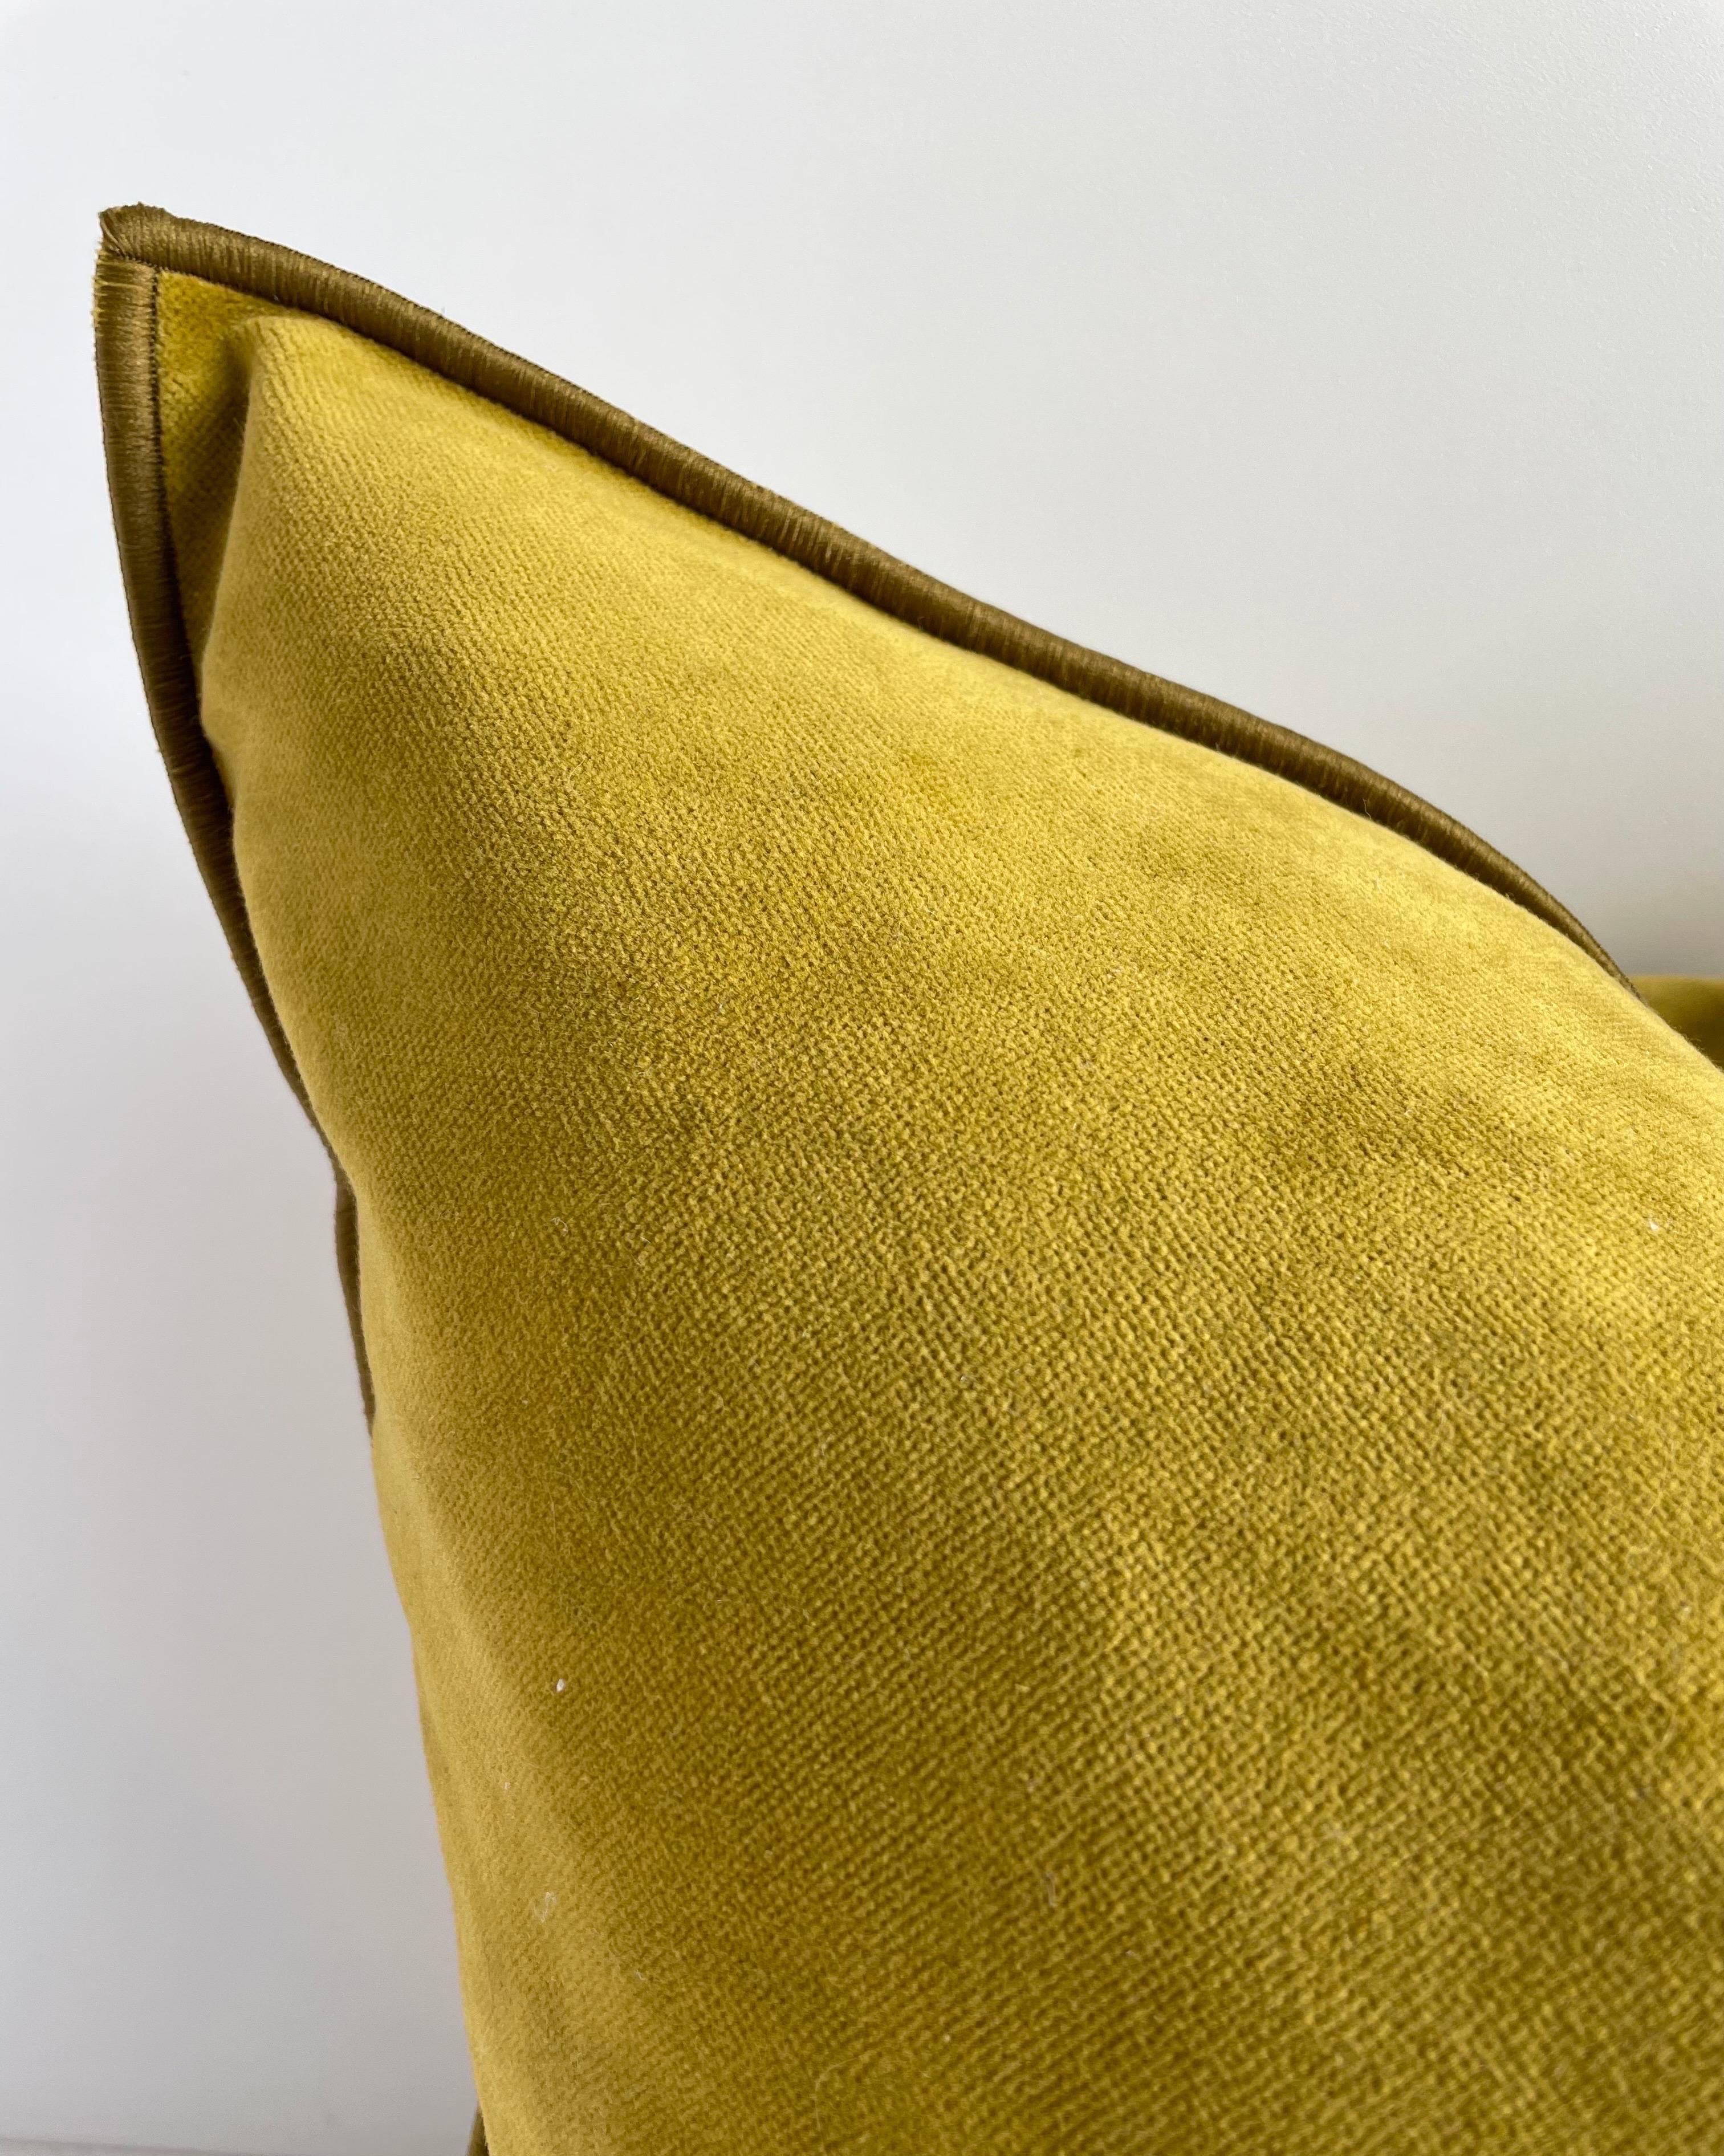 Beautiful rich mustard yellow vintage style velvet pillow with binded edge. Metal zipper closure, and leather pull. 
Custom made in Paris, France. 
Includes insert.
Color: Ocre
Size: 20